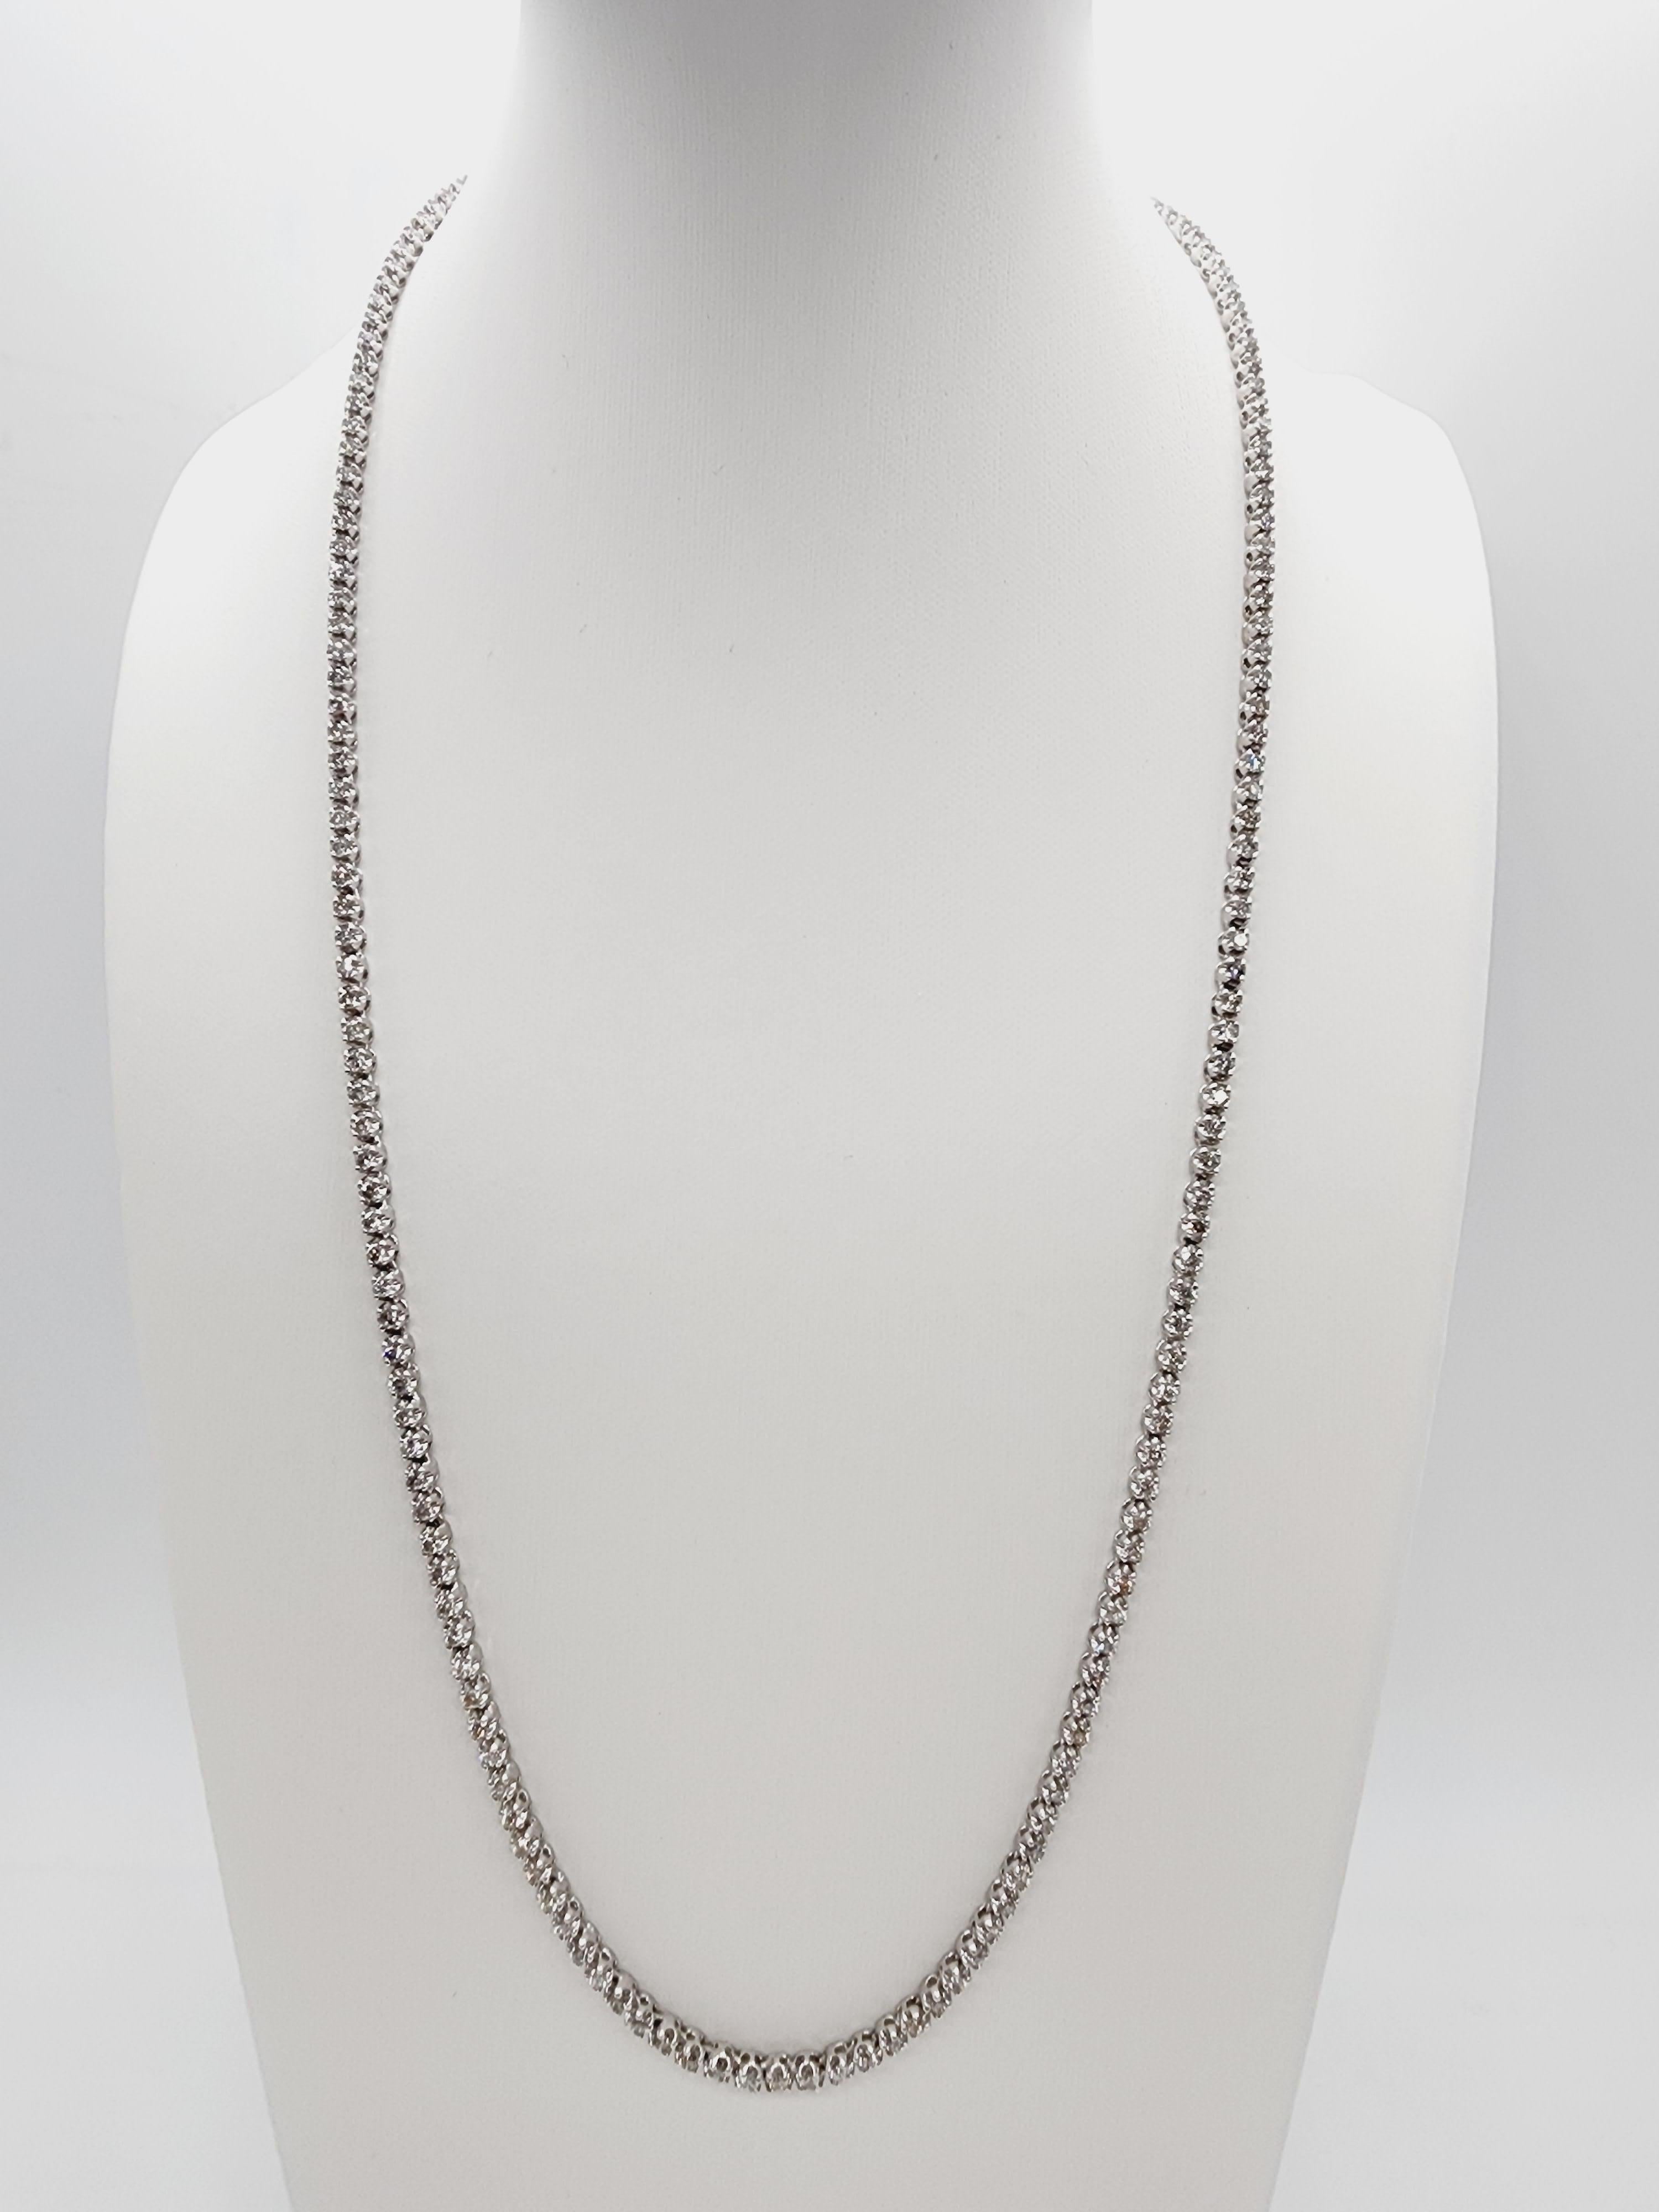 Brilliant and beautiful buttercup necklace, natural round-brilliant cut white diamonds clean and excellent shine. 14k white gold buttercup setting. 
20 inch length. Average G Color, SI Clarity.  2.9 mm wide.